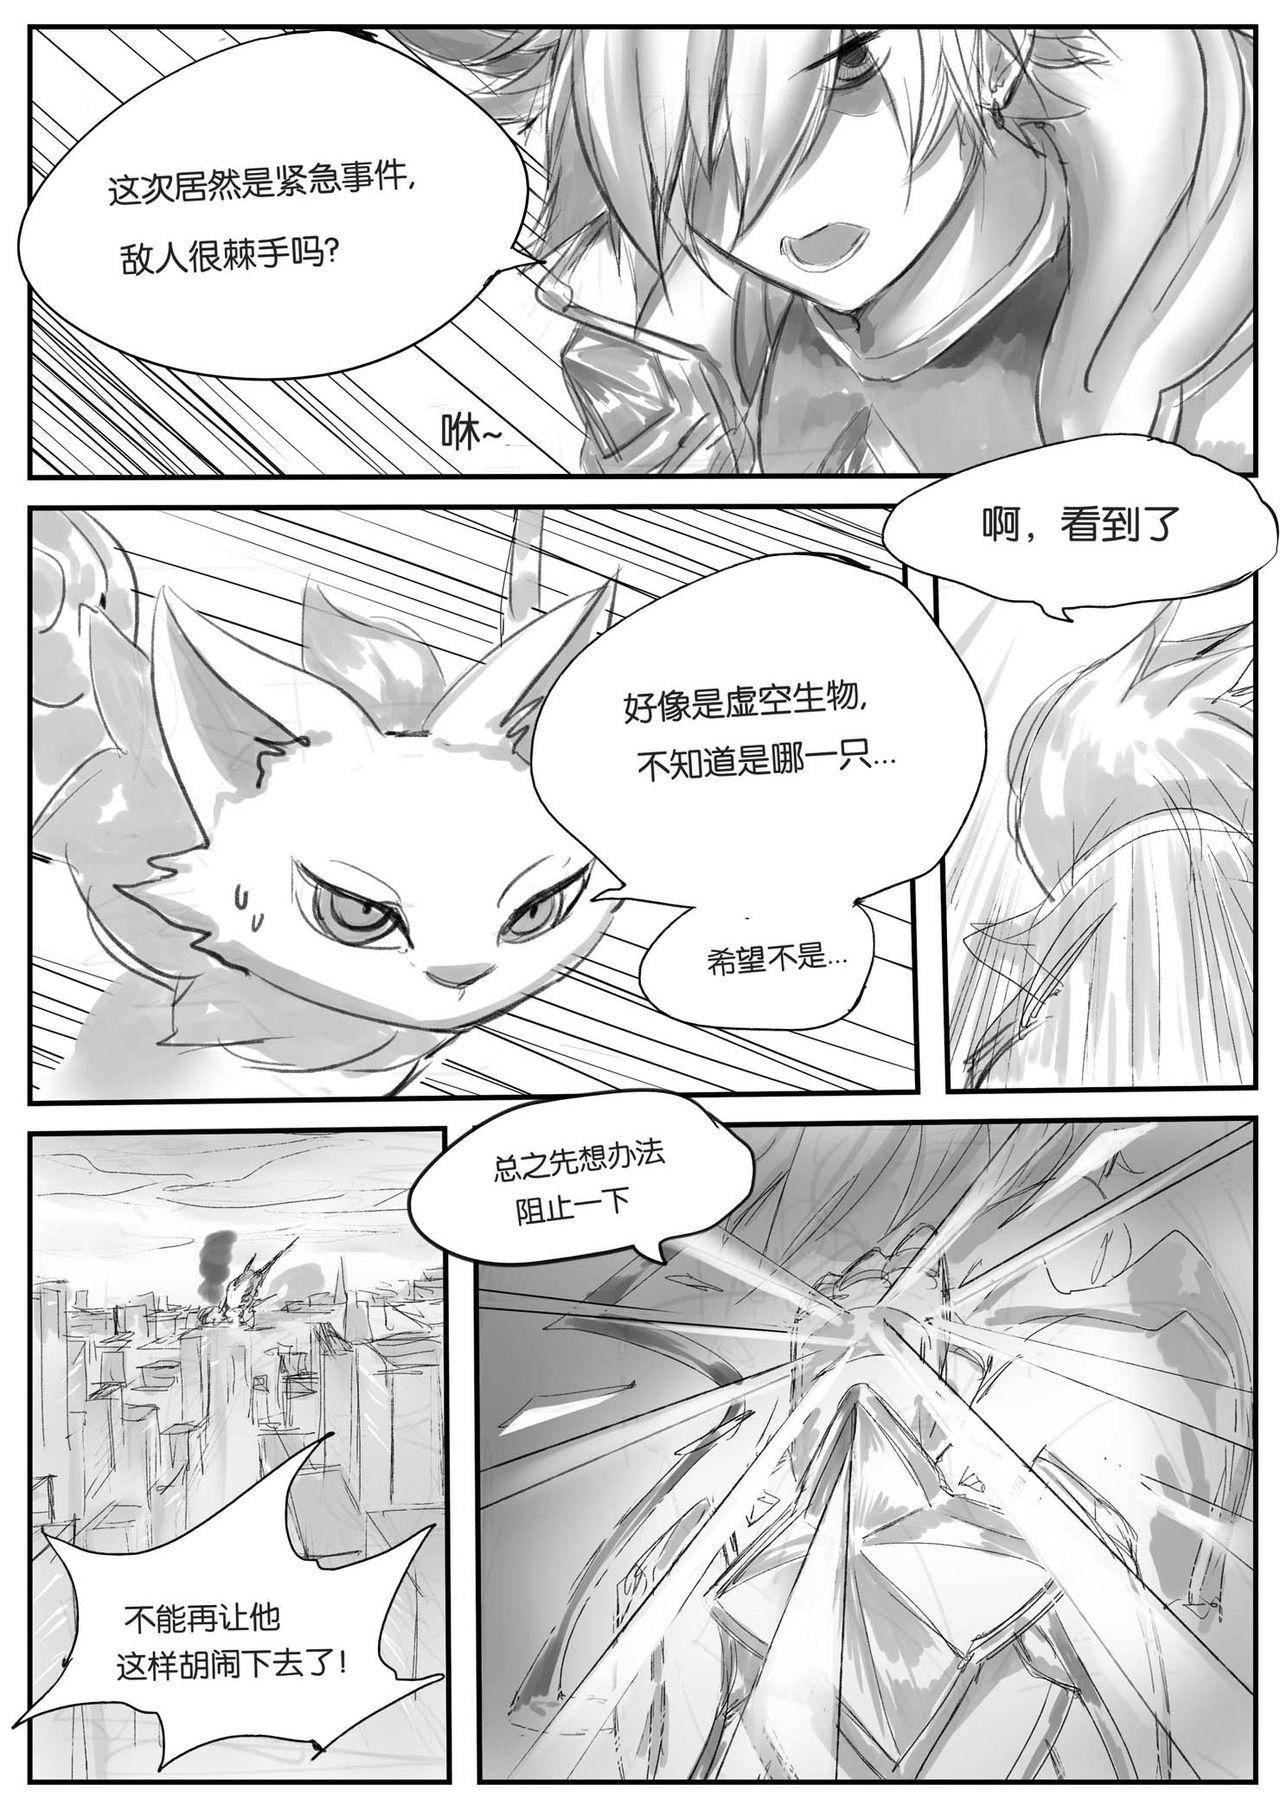 Hardcore Free Porn 守护者之Xing - League of legends Short Hair - Page 10